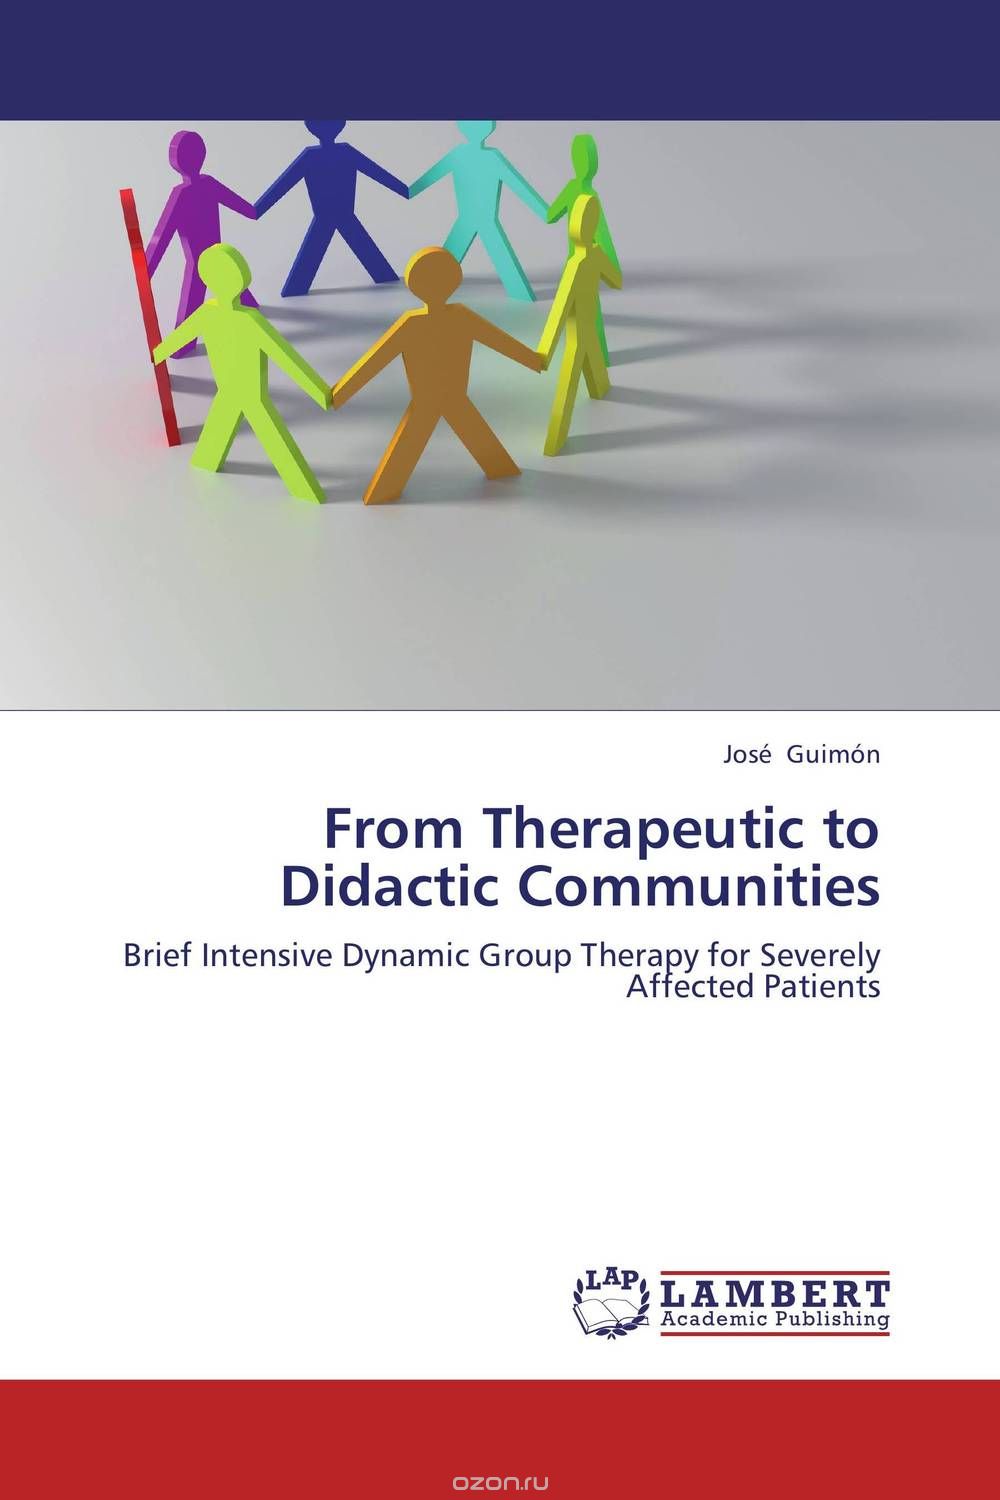 From Therapeutic to Didactic Communities